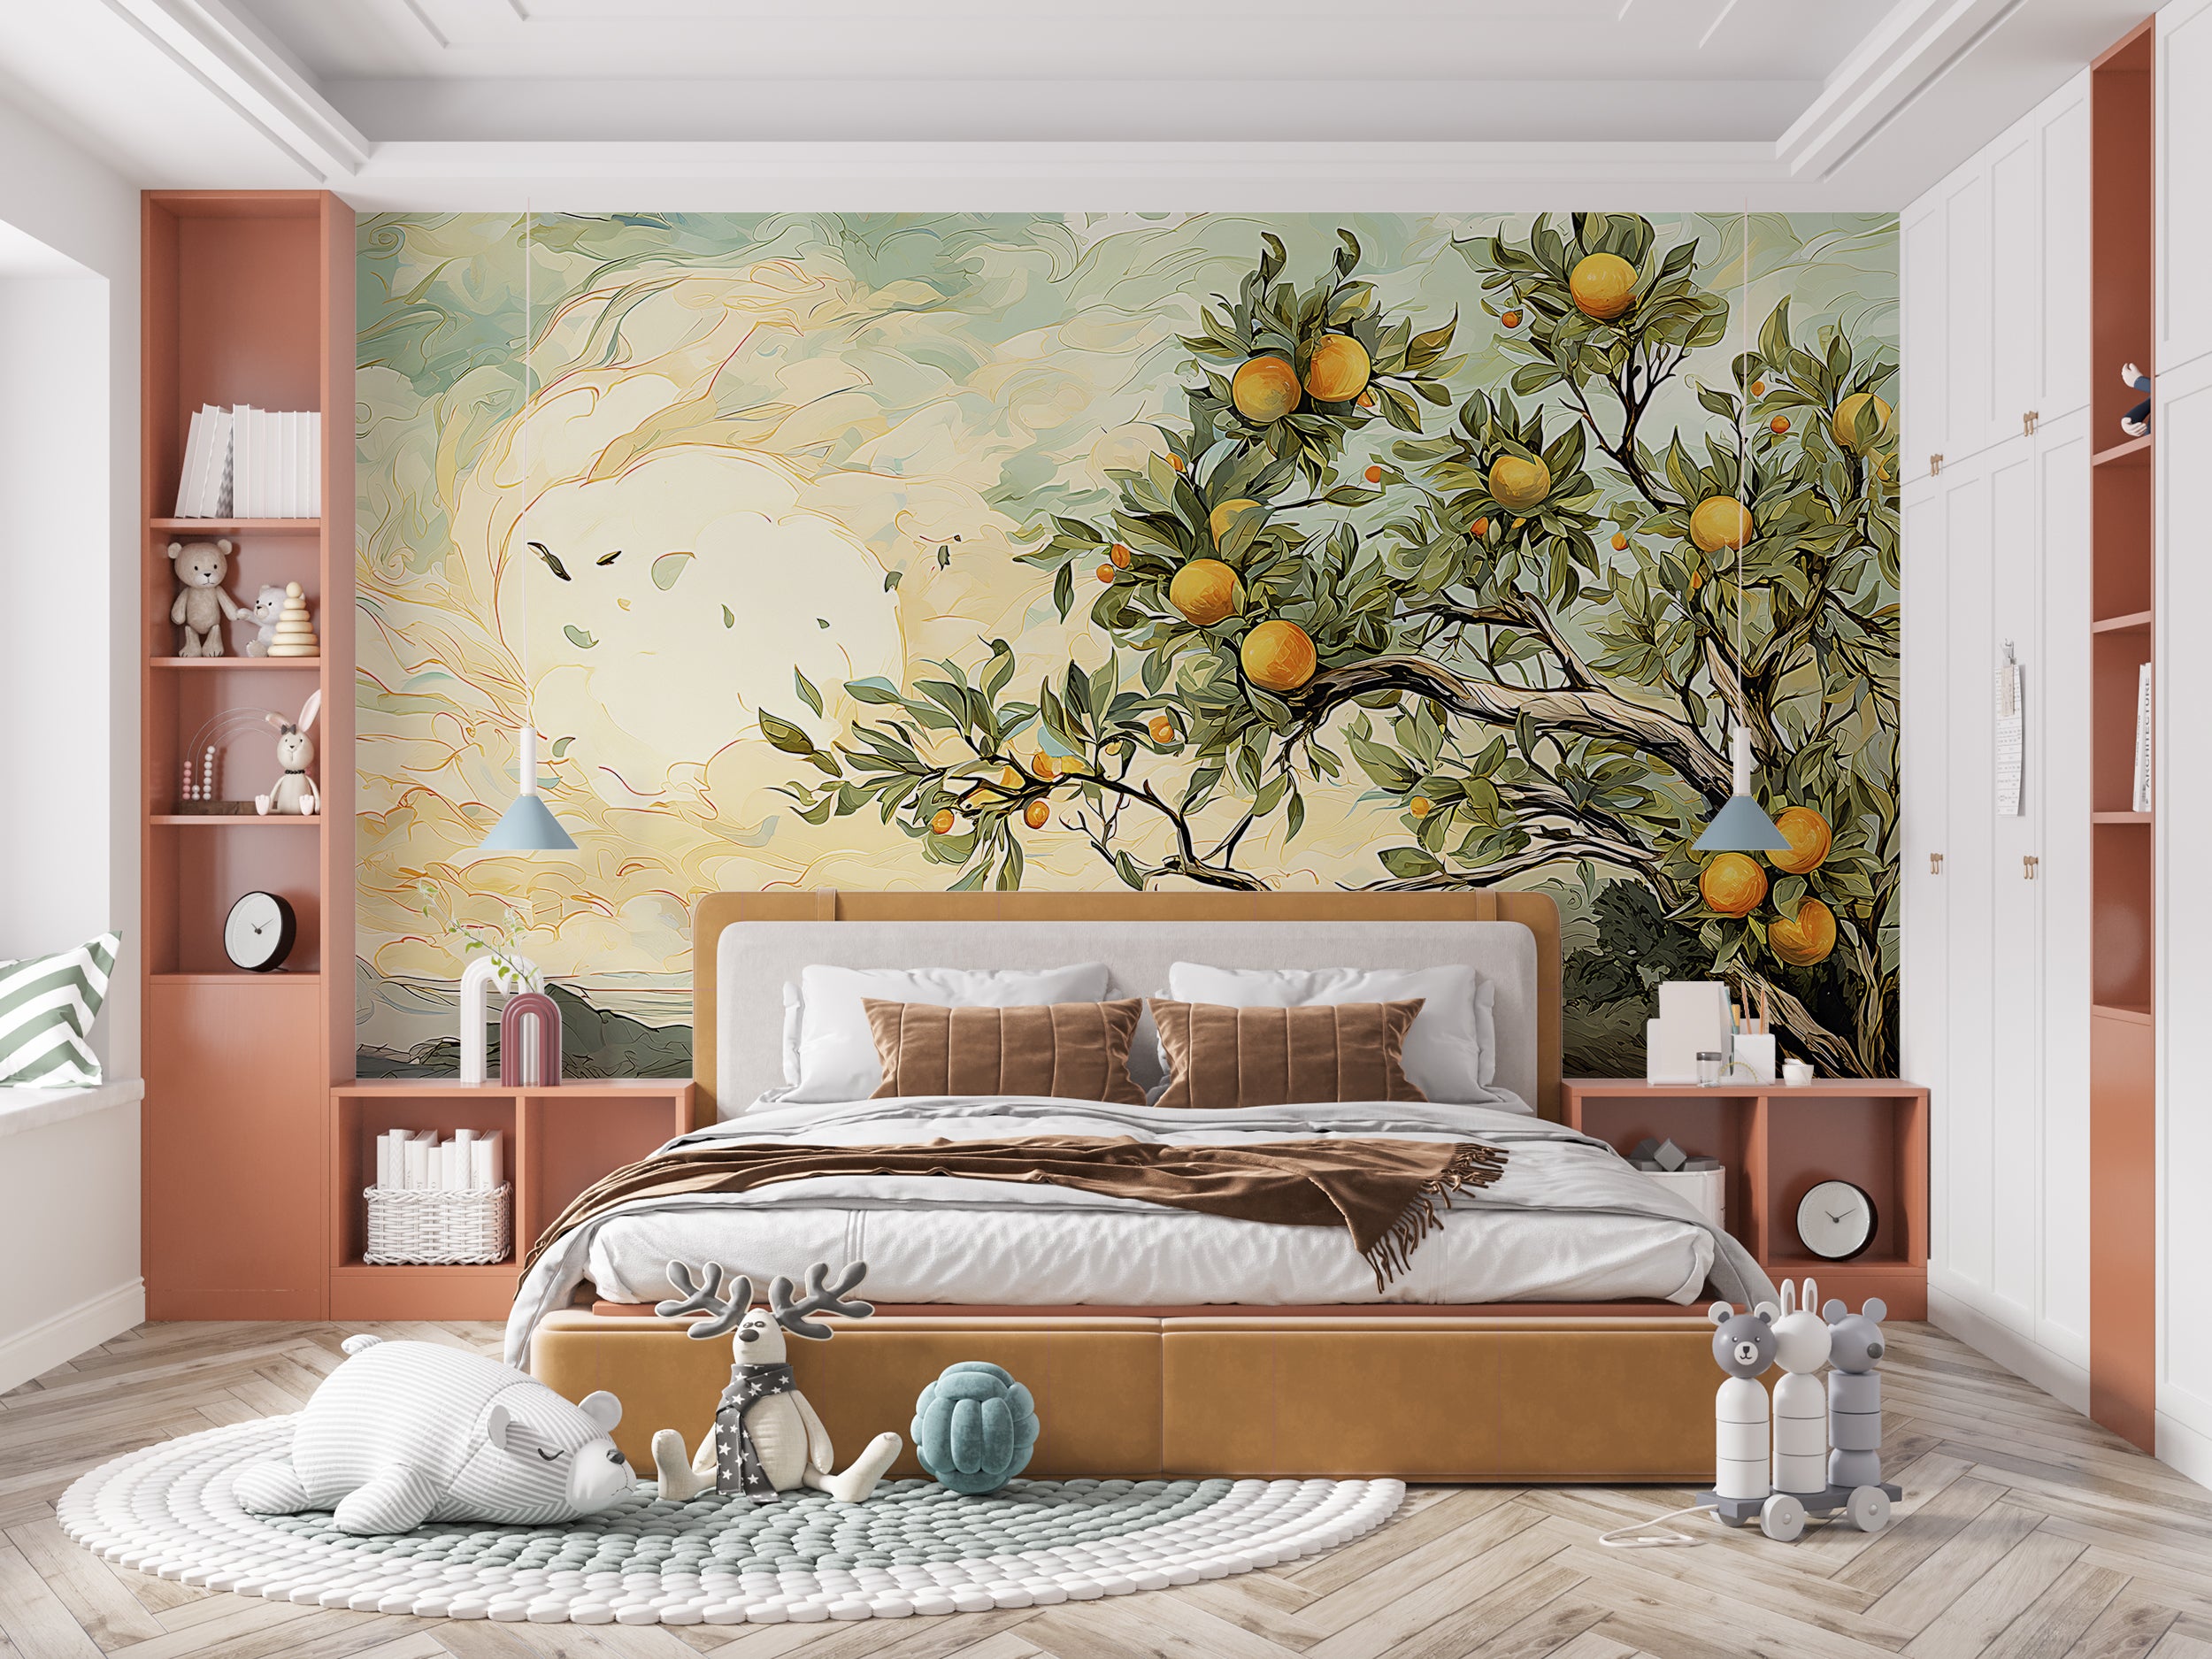 Impressionism Mural in Green and Yellow Landscape